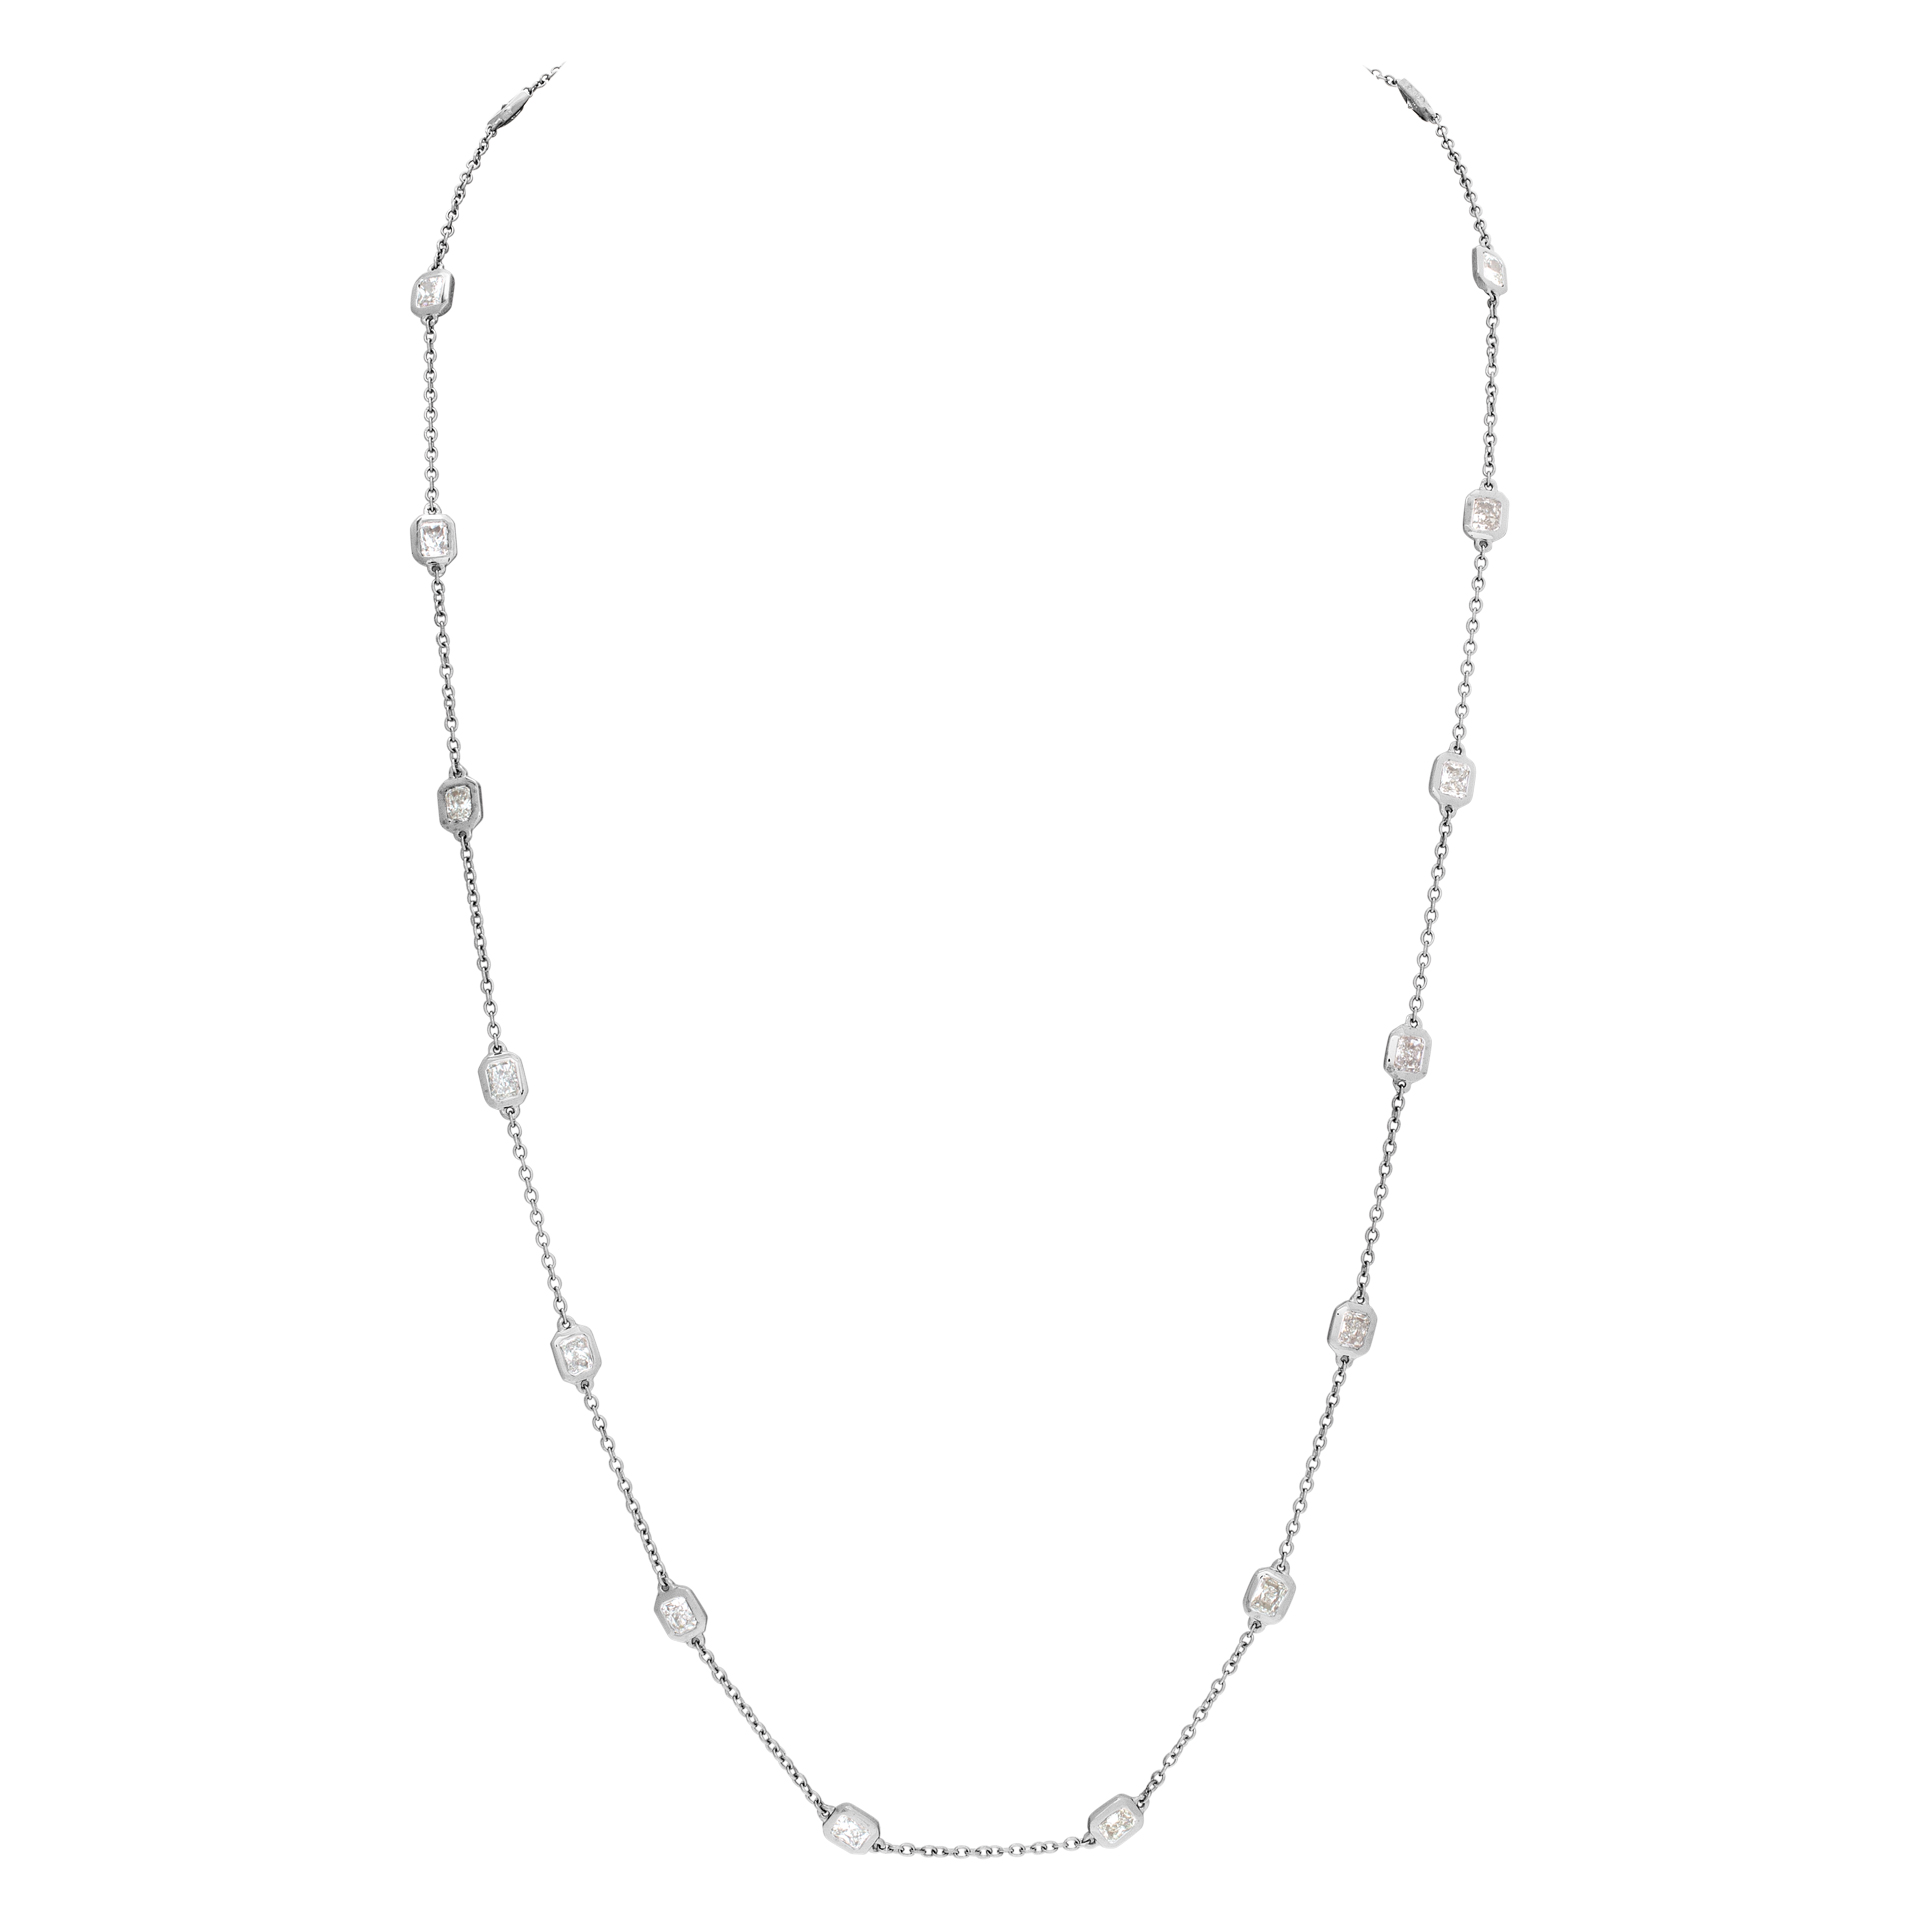 Radiant cut diamond by the yard necklace image 2